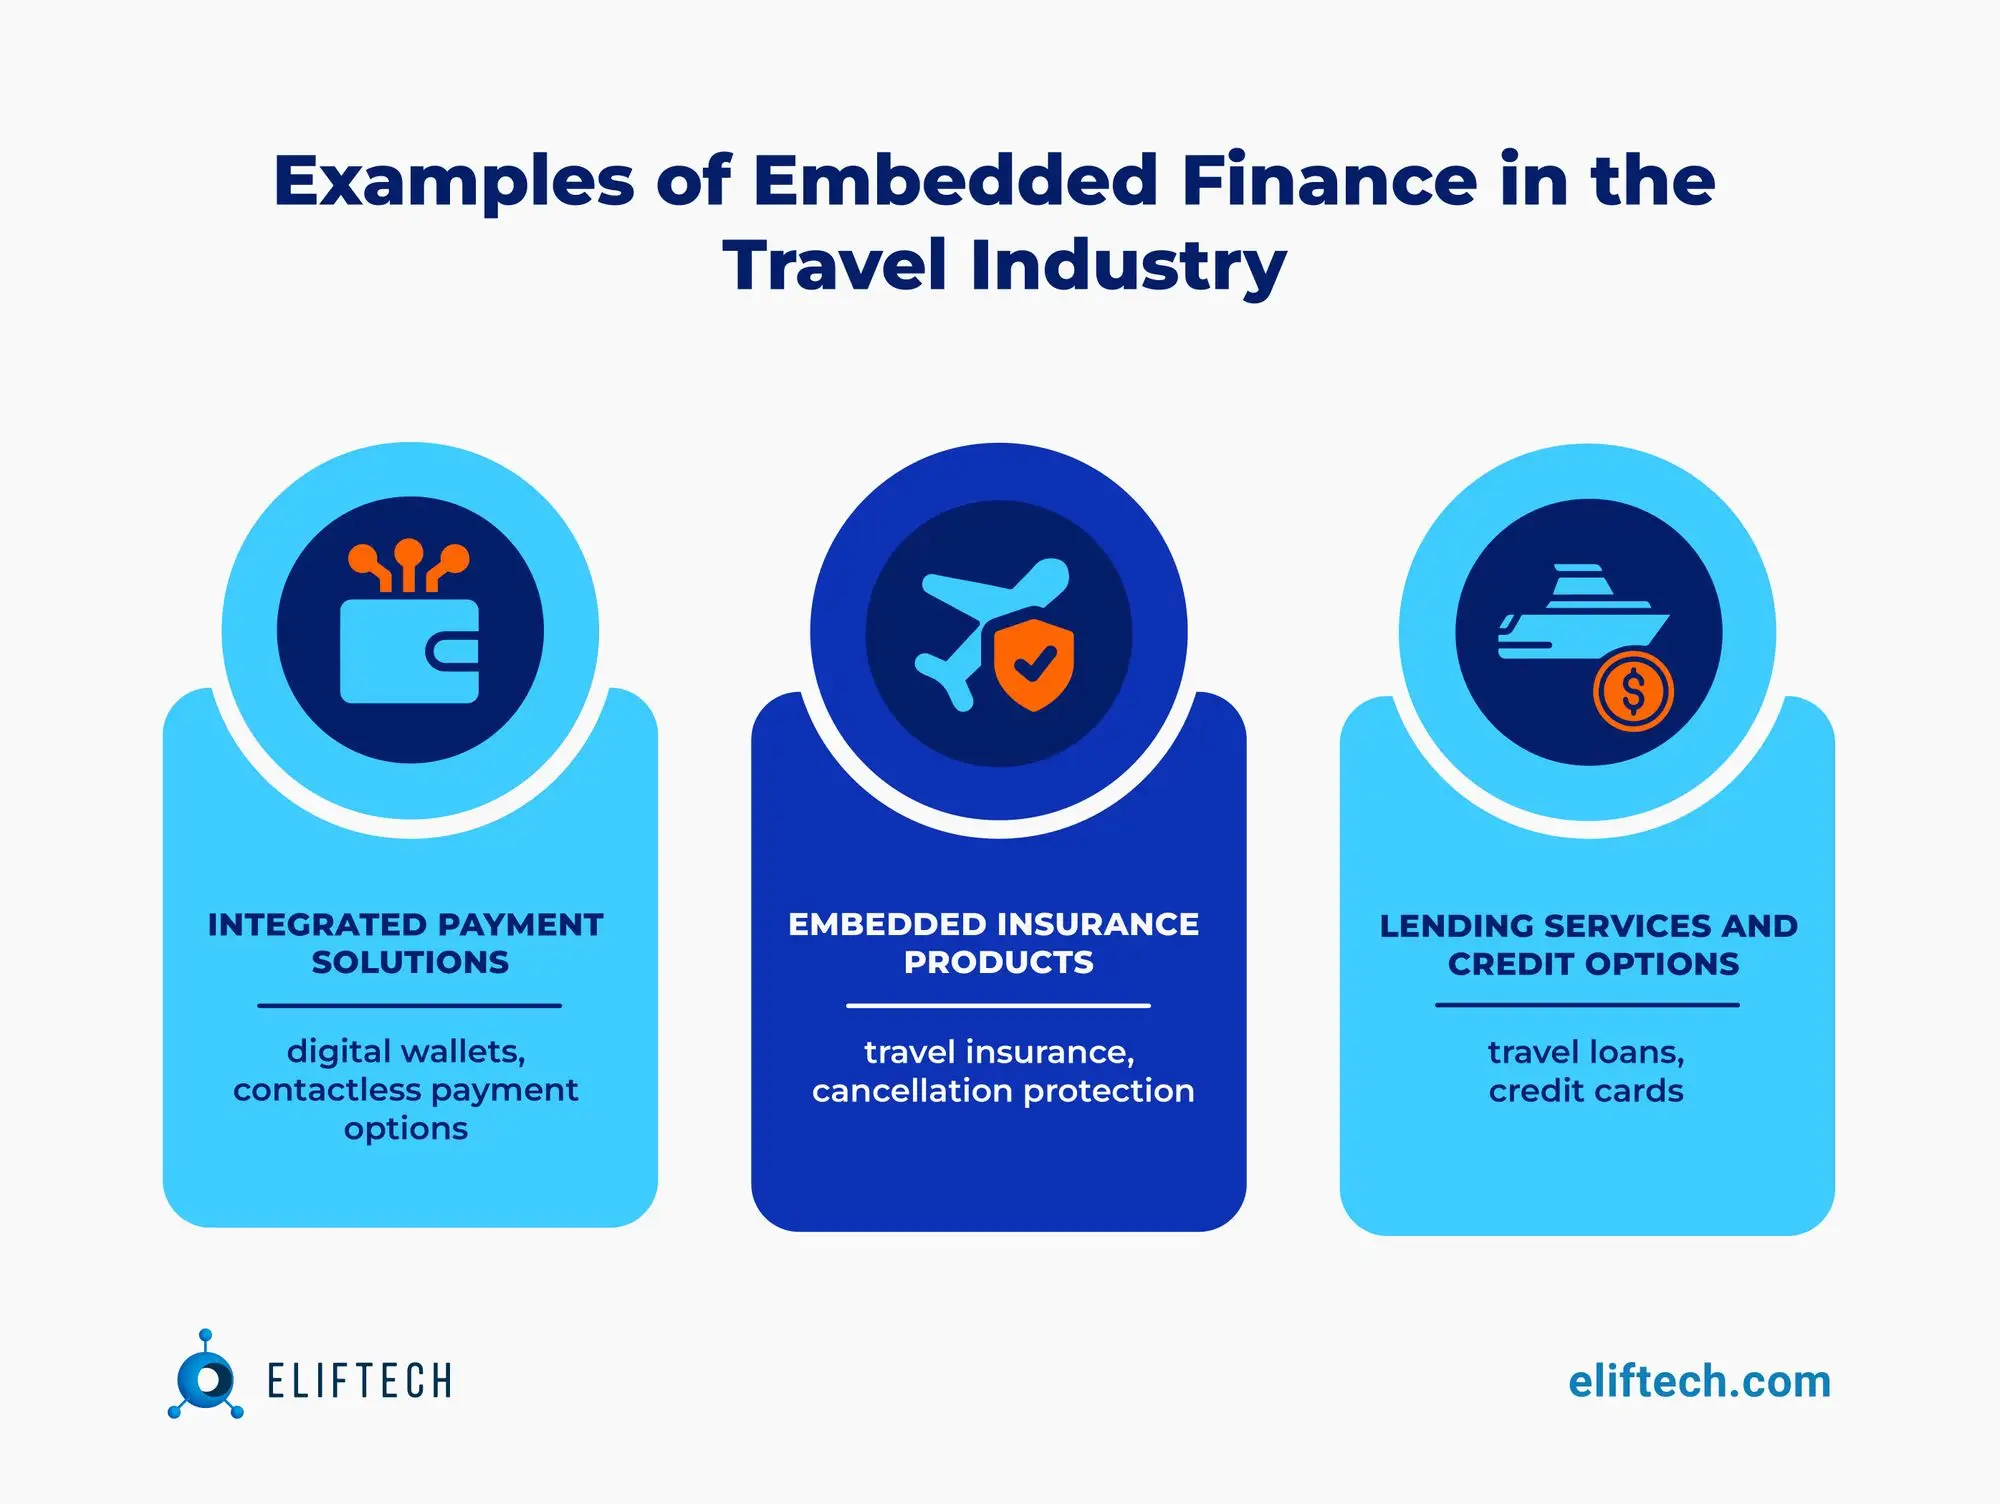 Examples of Embedded Finance in the Travel Industry